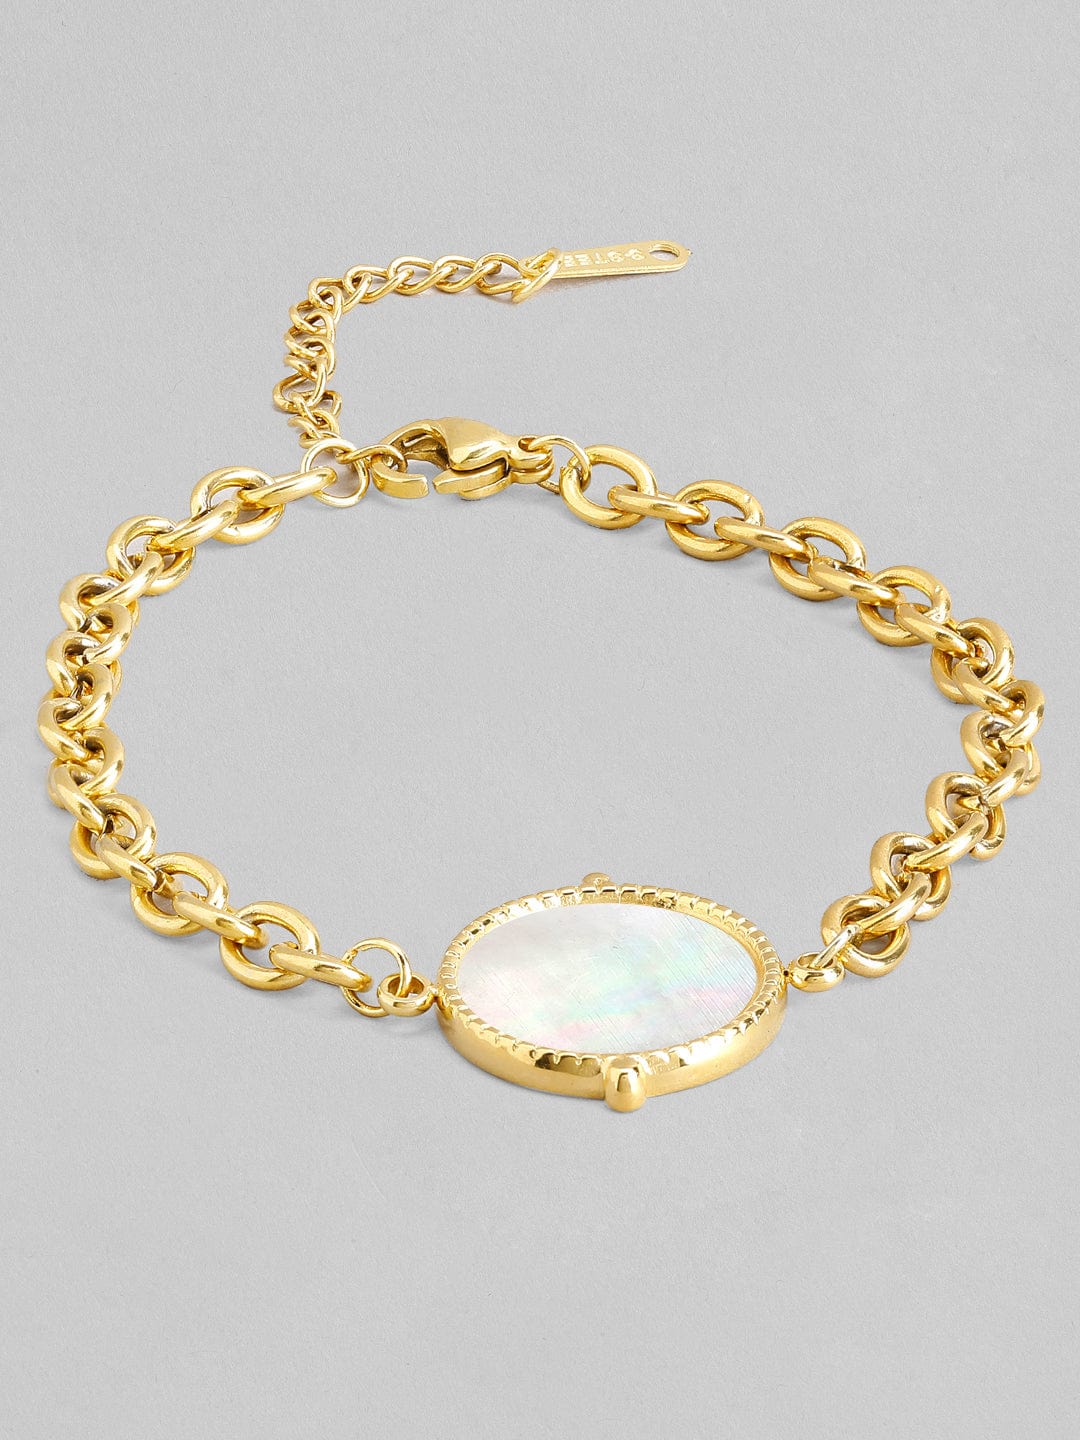 Rubans Voguish 18K Gold Plated Stainless Steel Waterproof Link Chain Bracelet With Shell Studded Charm. Bangles &amp; Bracelets